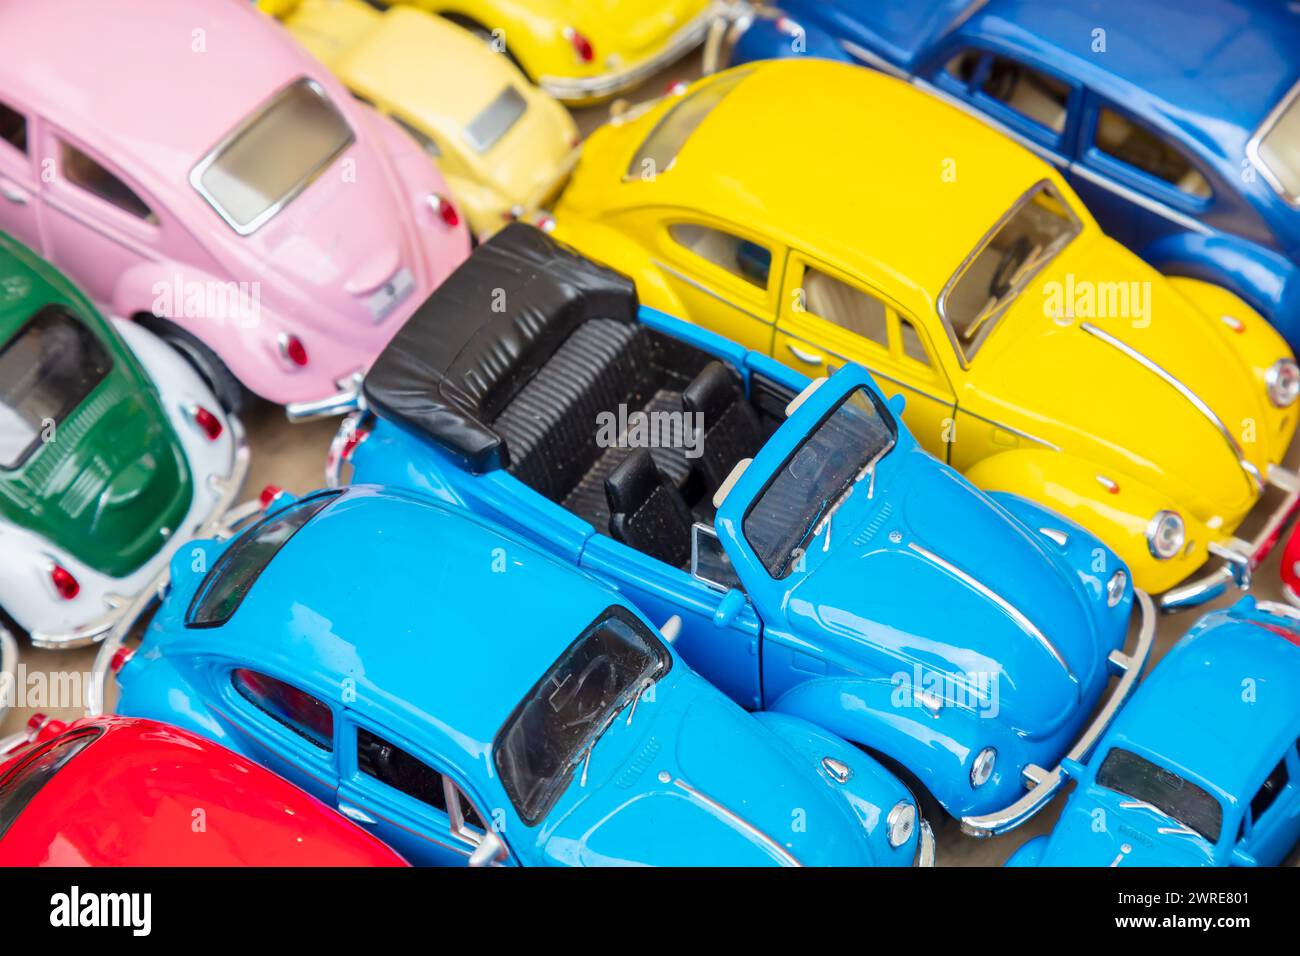 Deventer, The Netherlands - August 10, 2023: Collection of colorful Volkswagen Beetle model cars in Deventer, The Netherlands Stock Photo